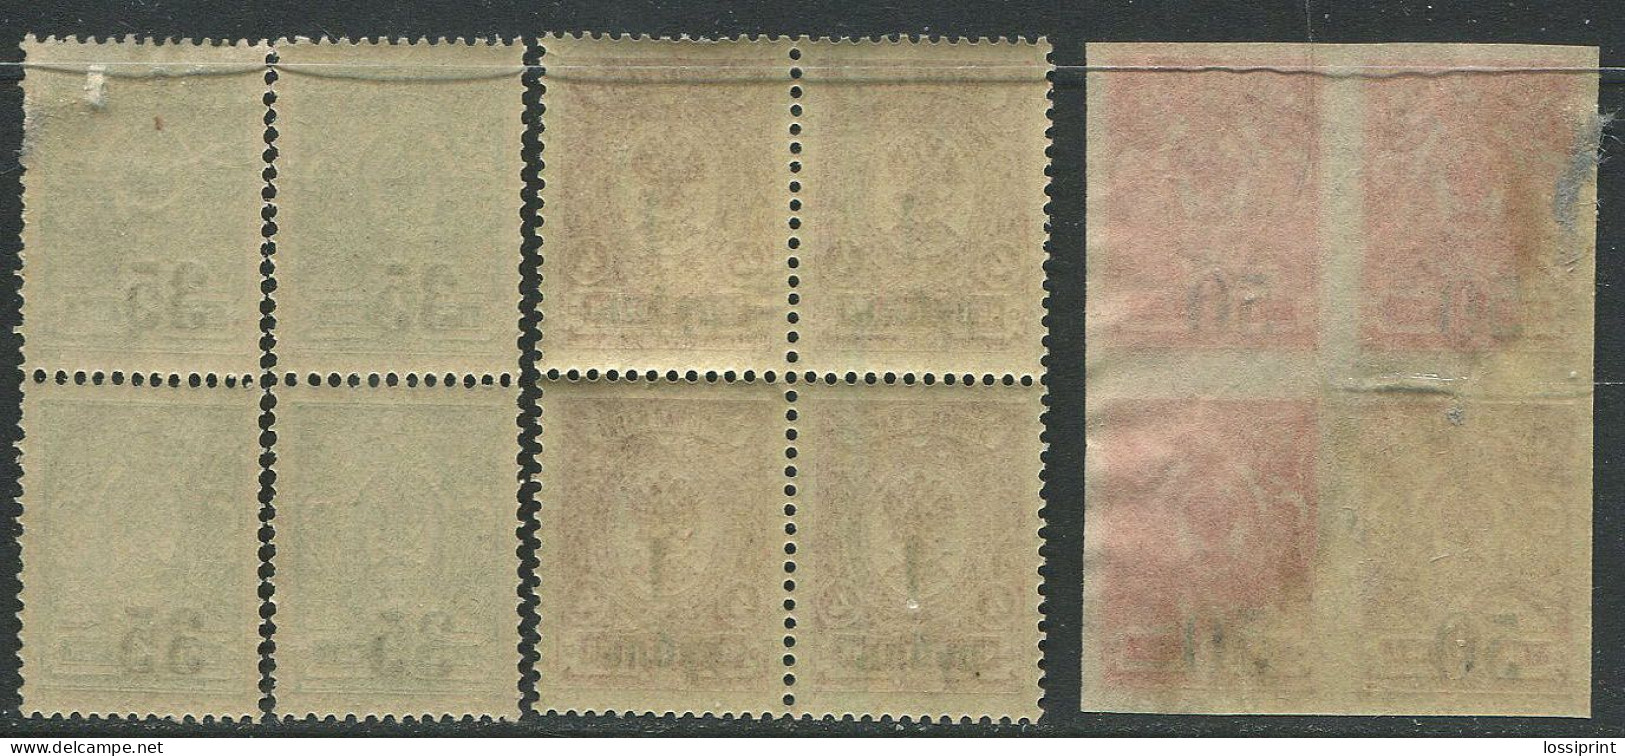 Russia:Unused Overprinted Koltschak Army Stamps 1919/1920 X4, MNH - Sibérie Et Extrême Orient